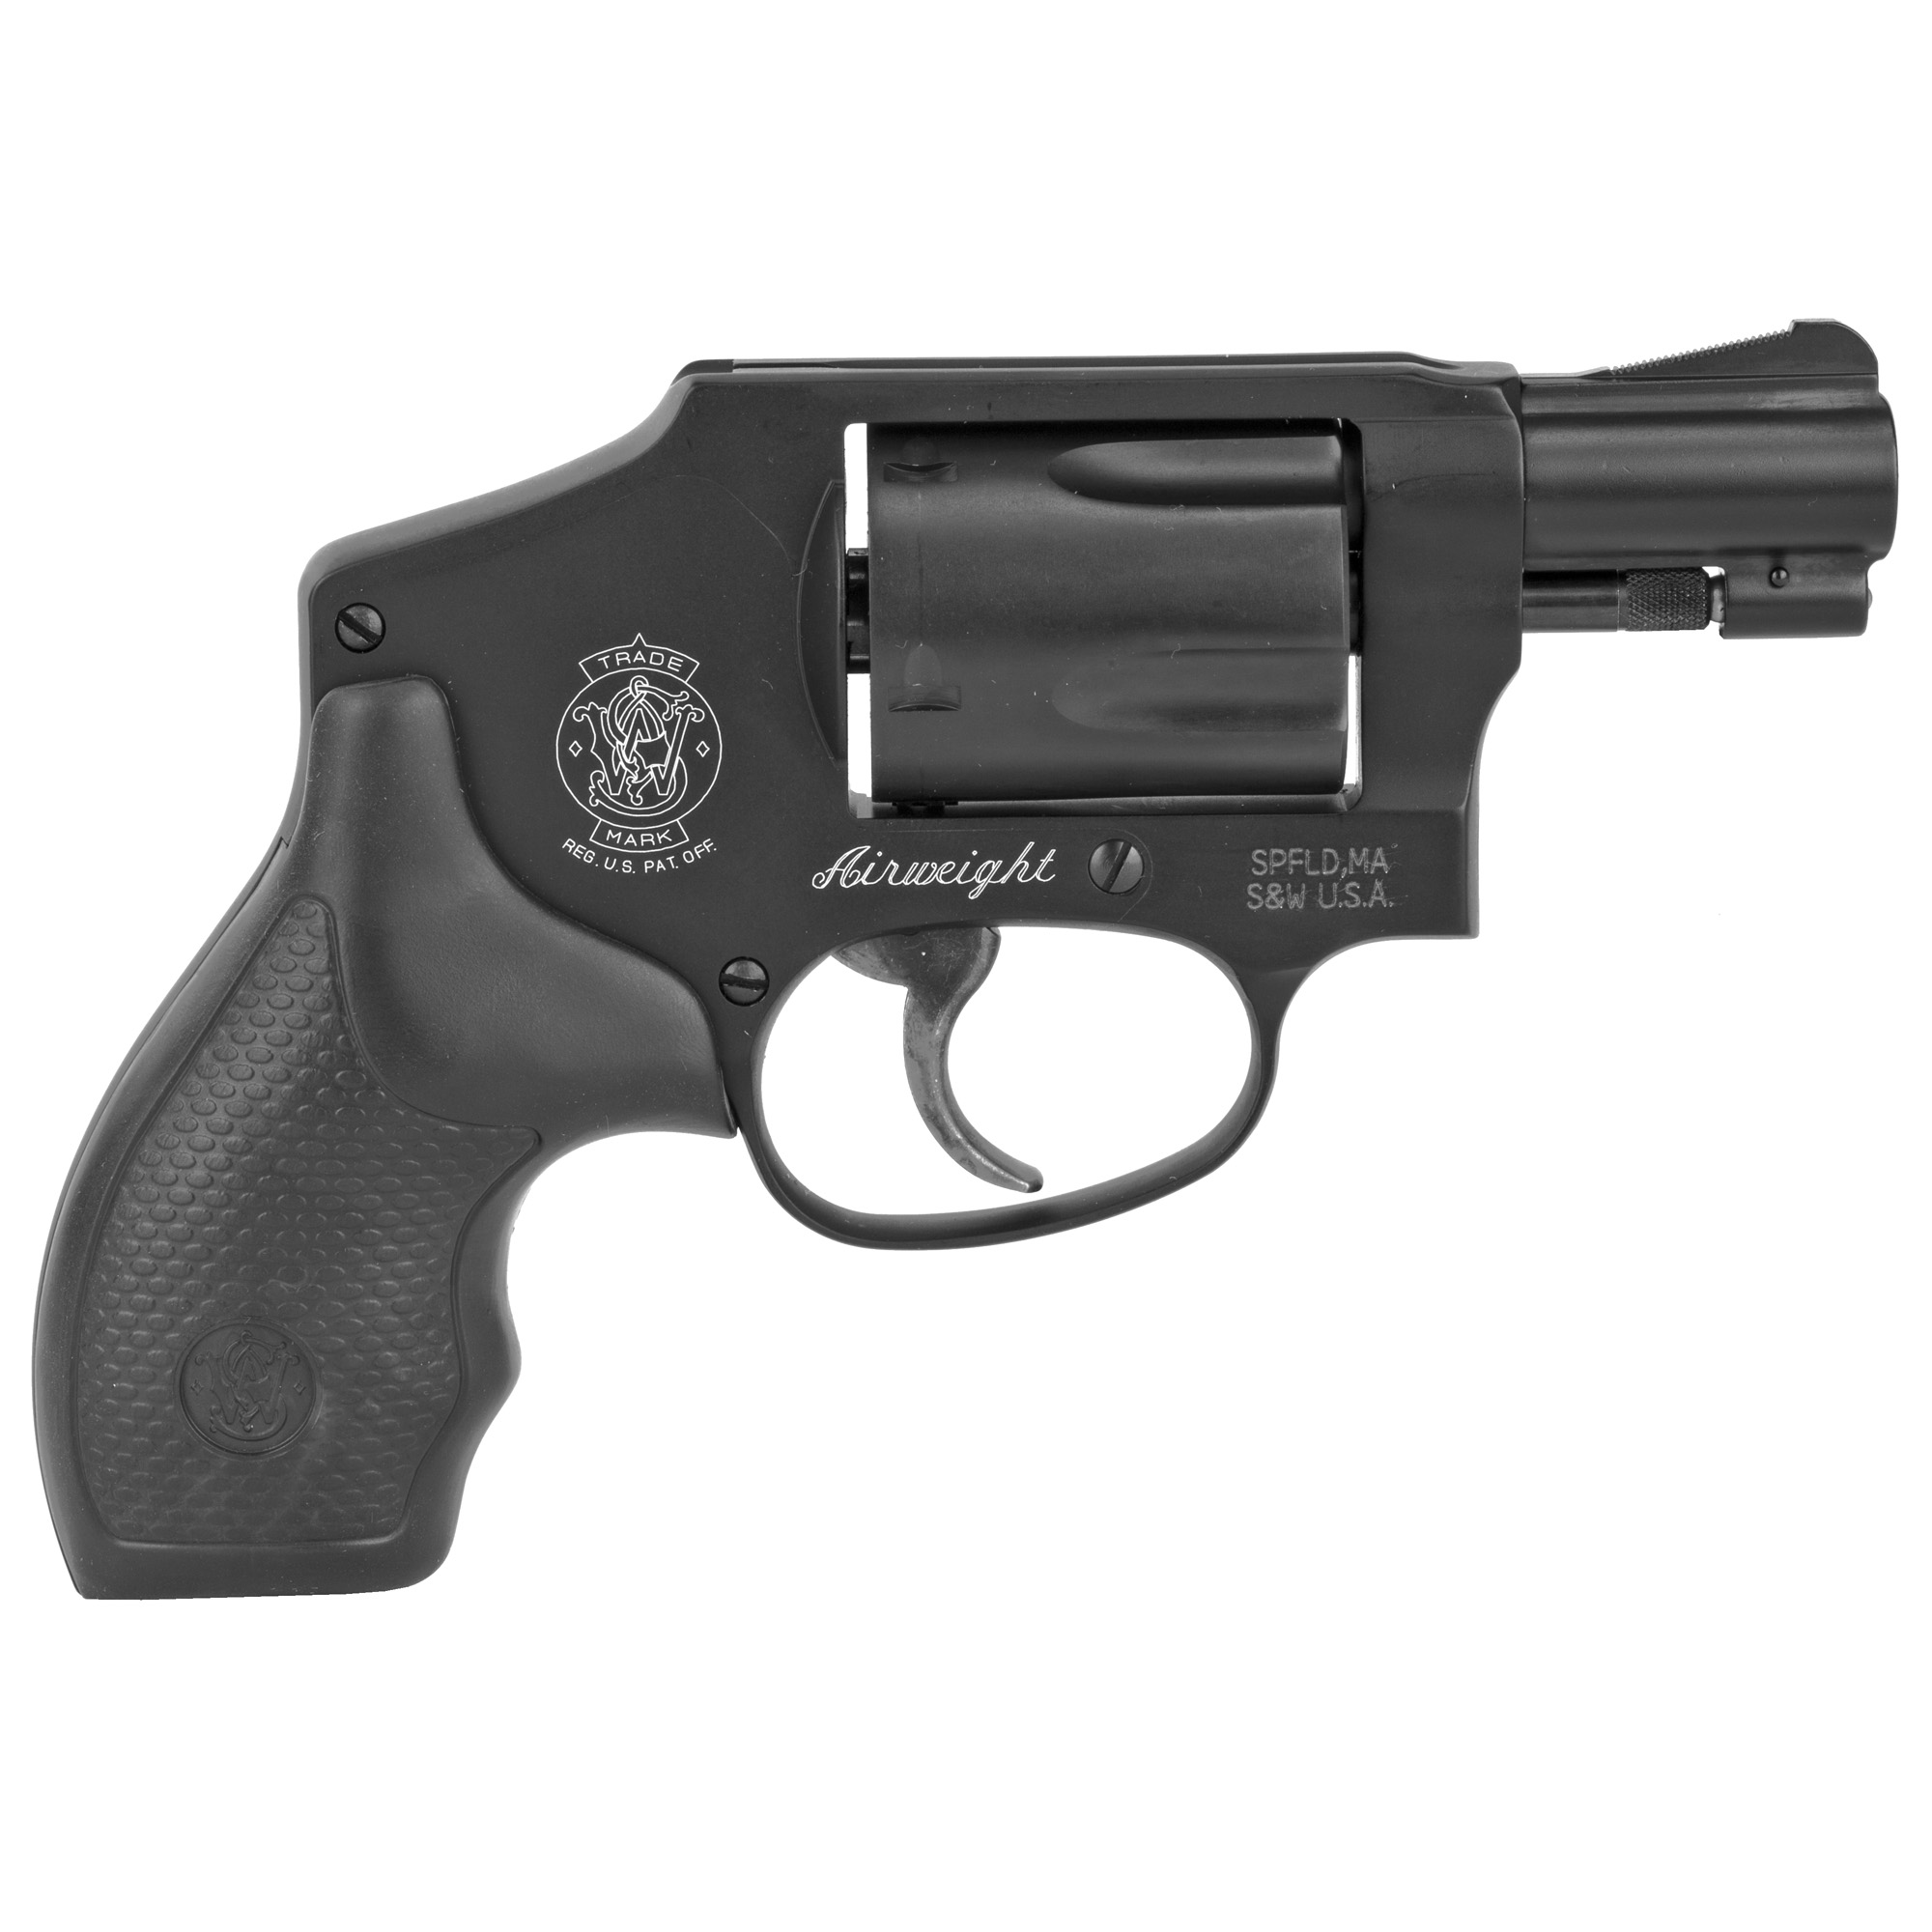 Smith & Wesson, Model 442, Double Action Only, Metal Frame Revolver, J-Frame, 38 Special, 1.875" Barrel, Alloy, Black, Rubber Grips, Integral Sights, 5 Rounds, No Internal Lock